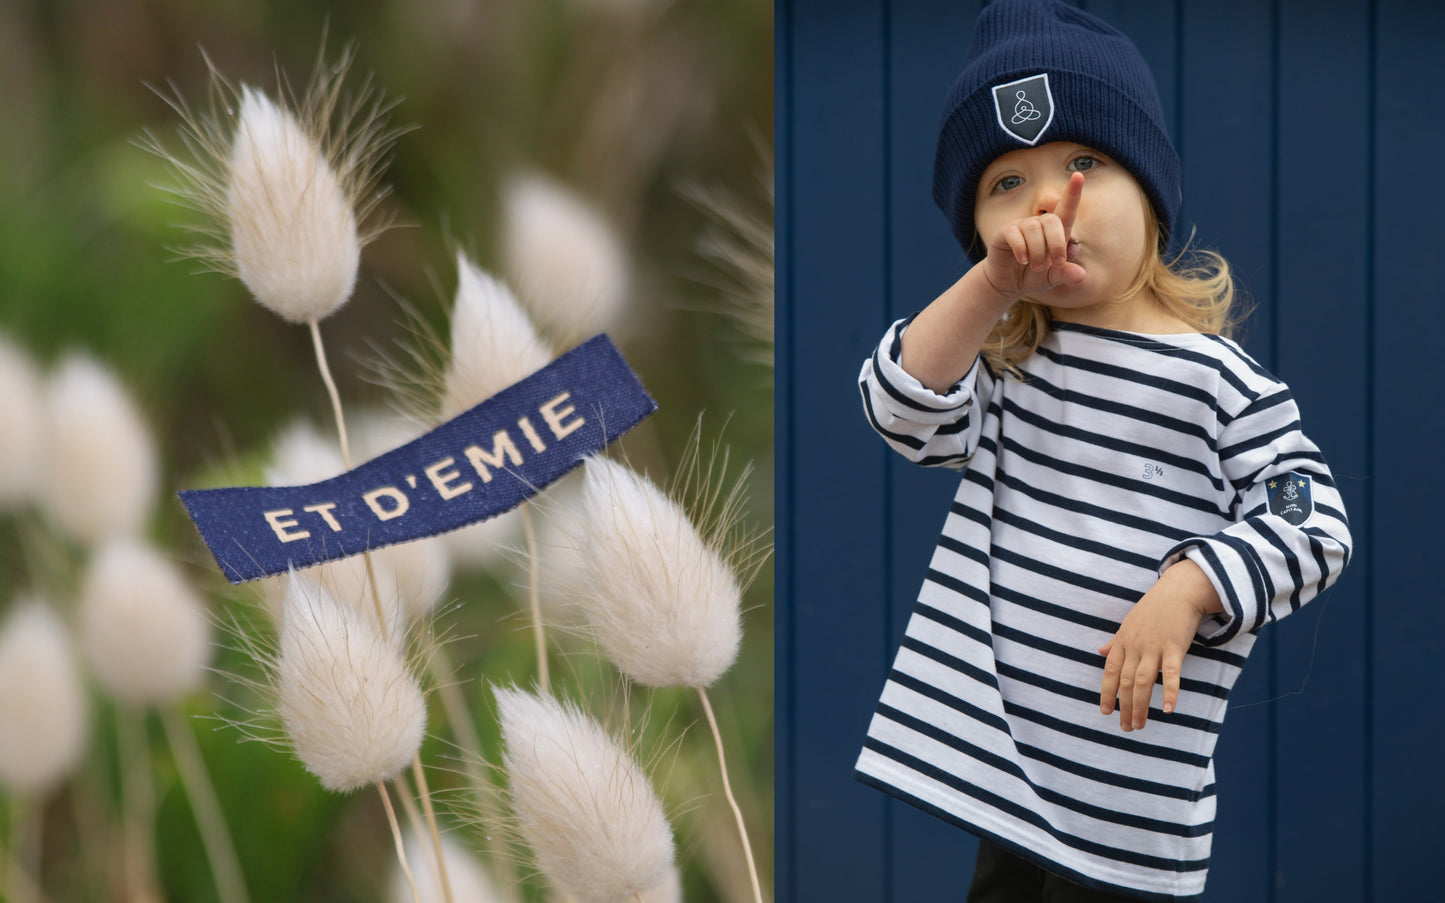 MINI CAPTAIN sailor shirt "I'm 3 and a half years old" embroidered in organic cotton 🇫🇷